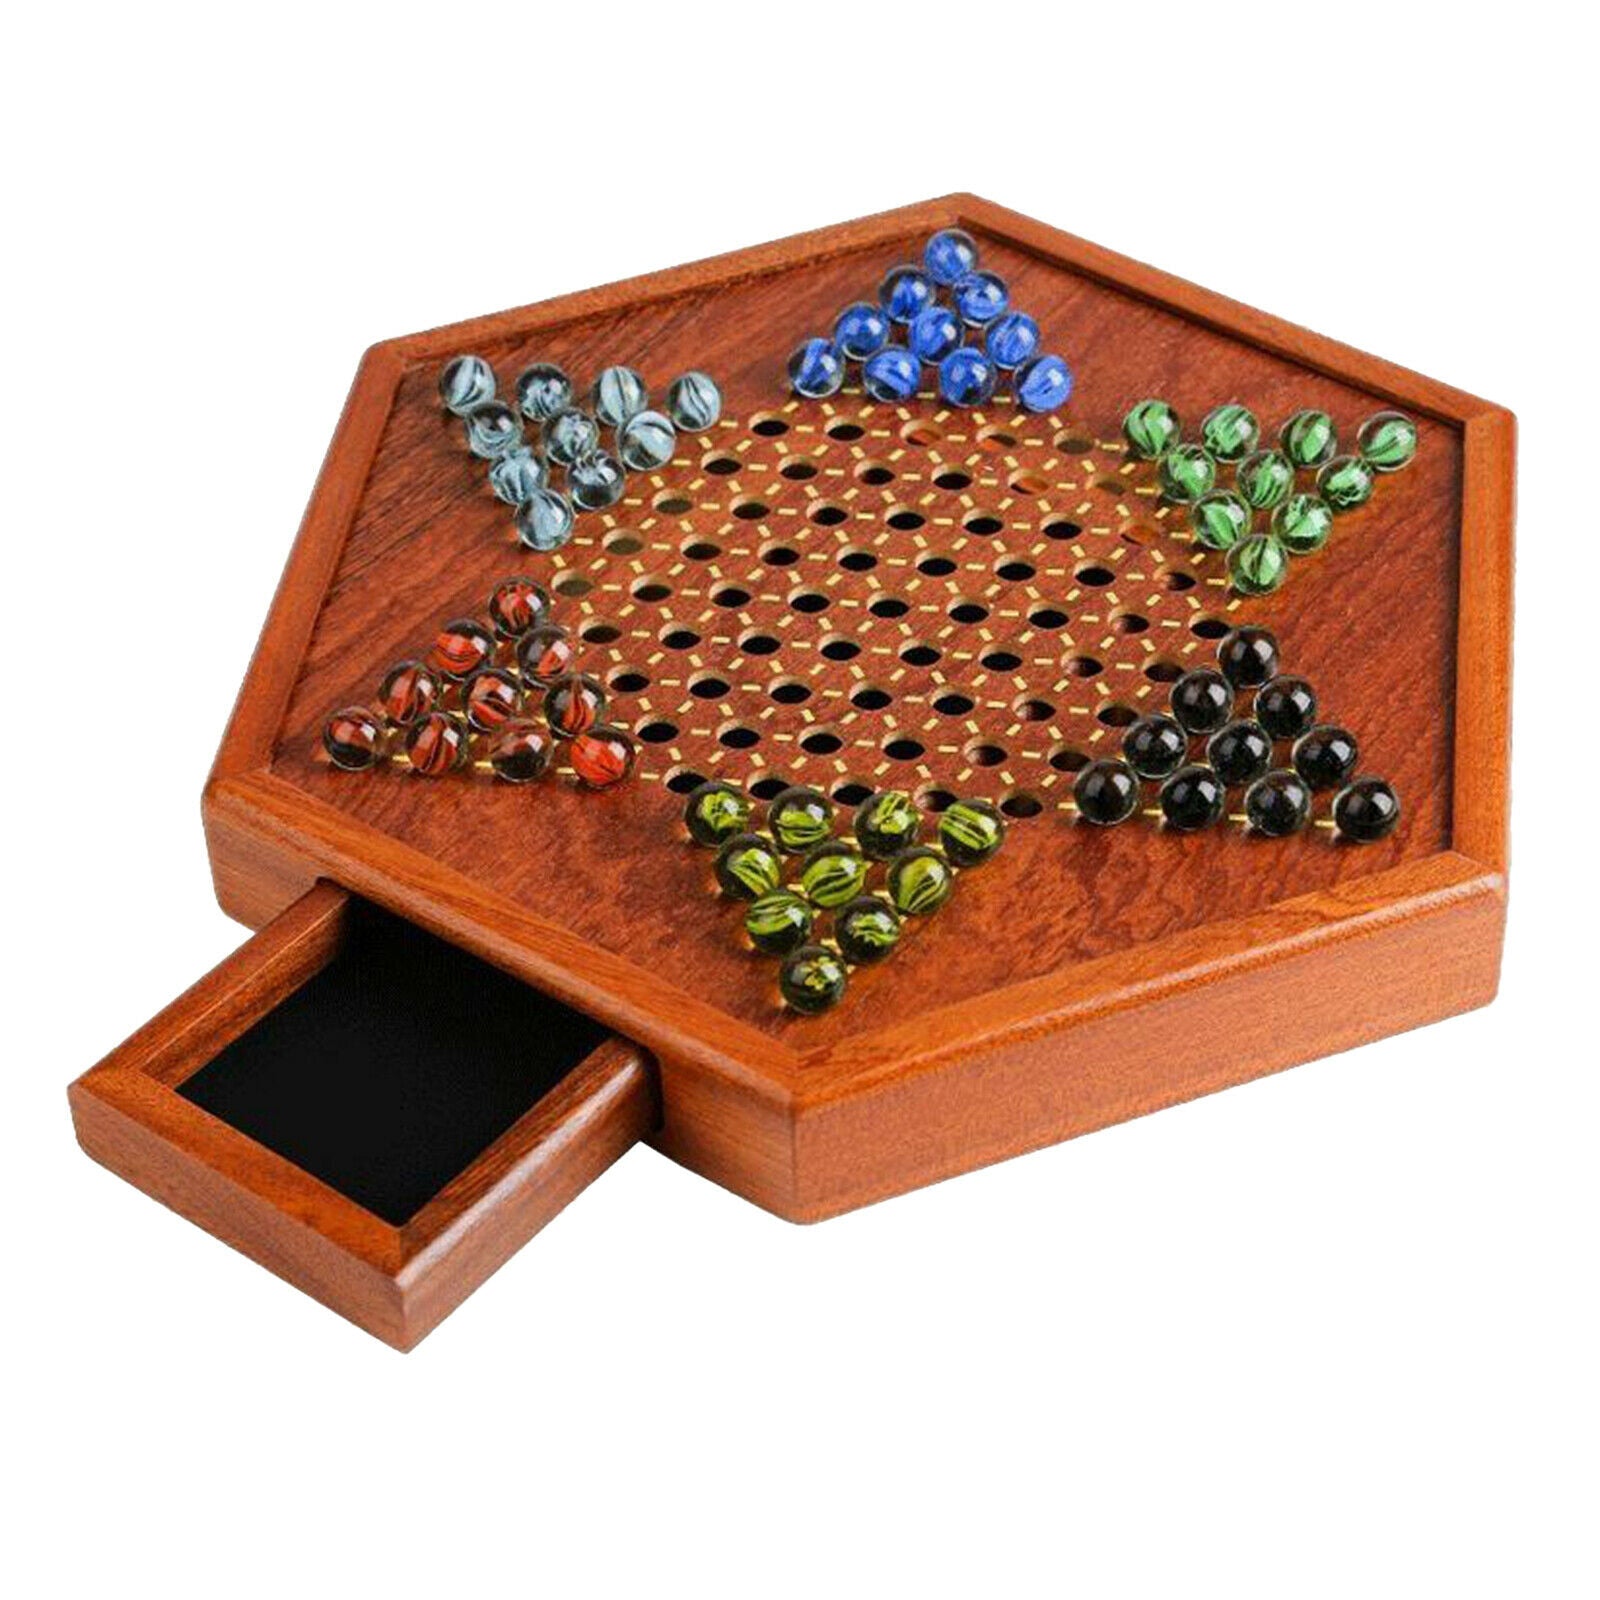 Chinese Checkers, Wooden Game Set, Built-in Storage Drawers, 6 Multi-Colored